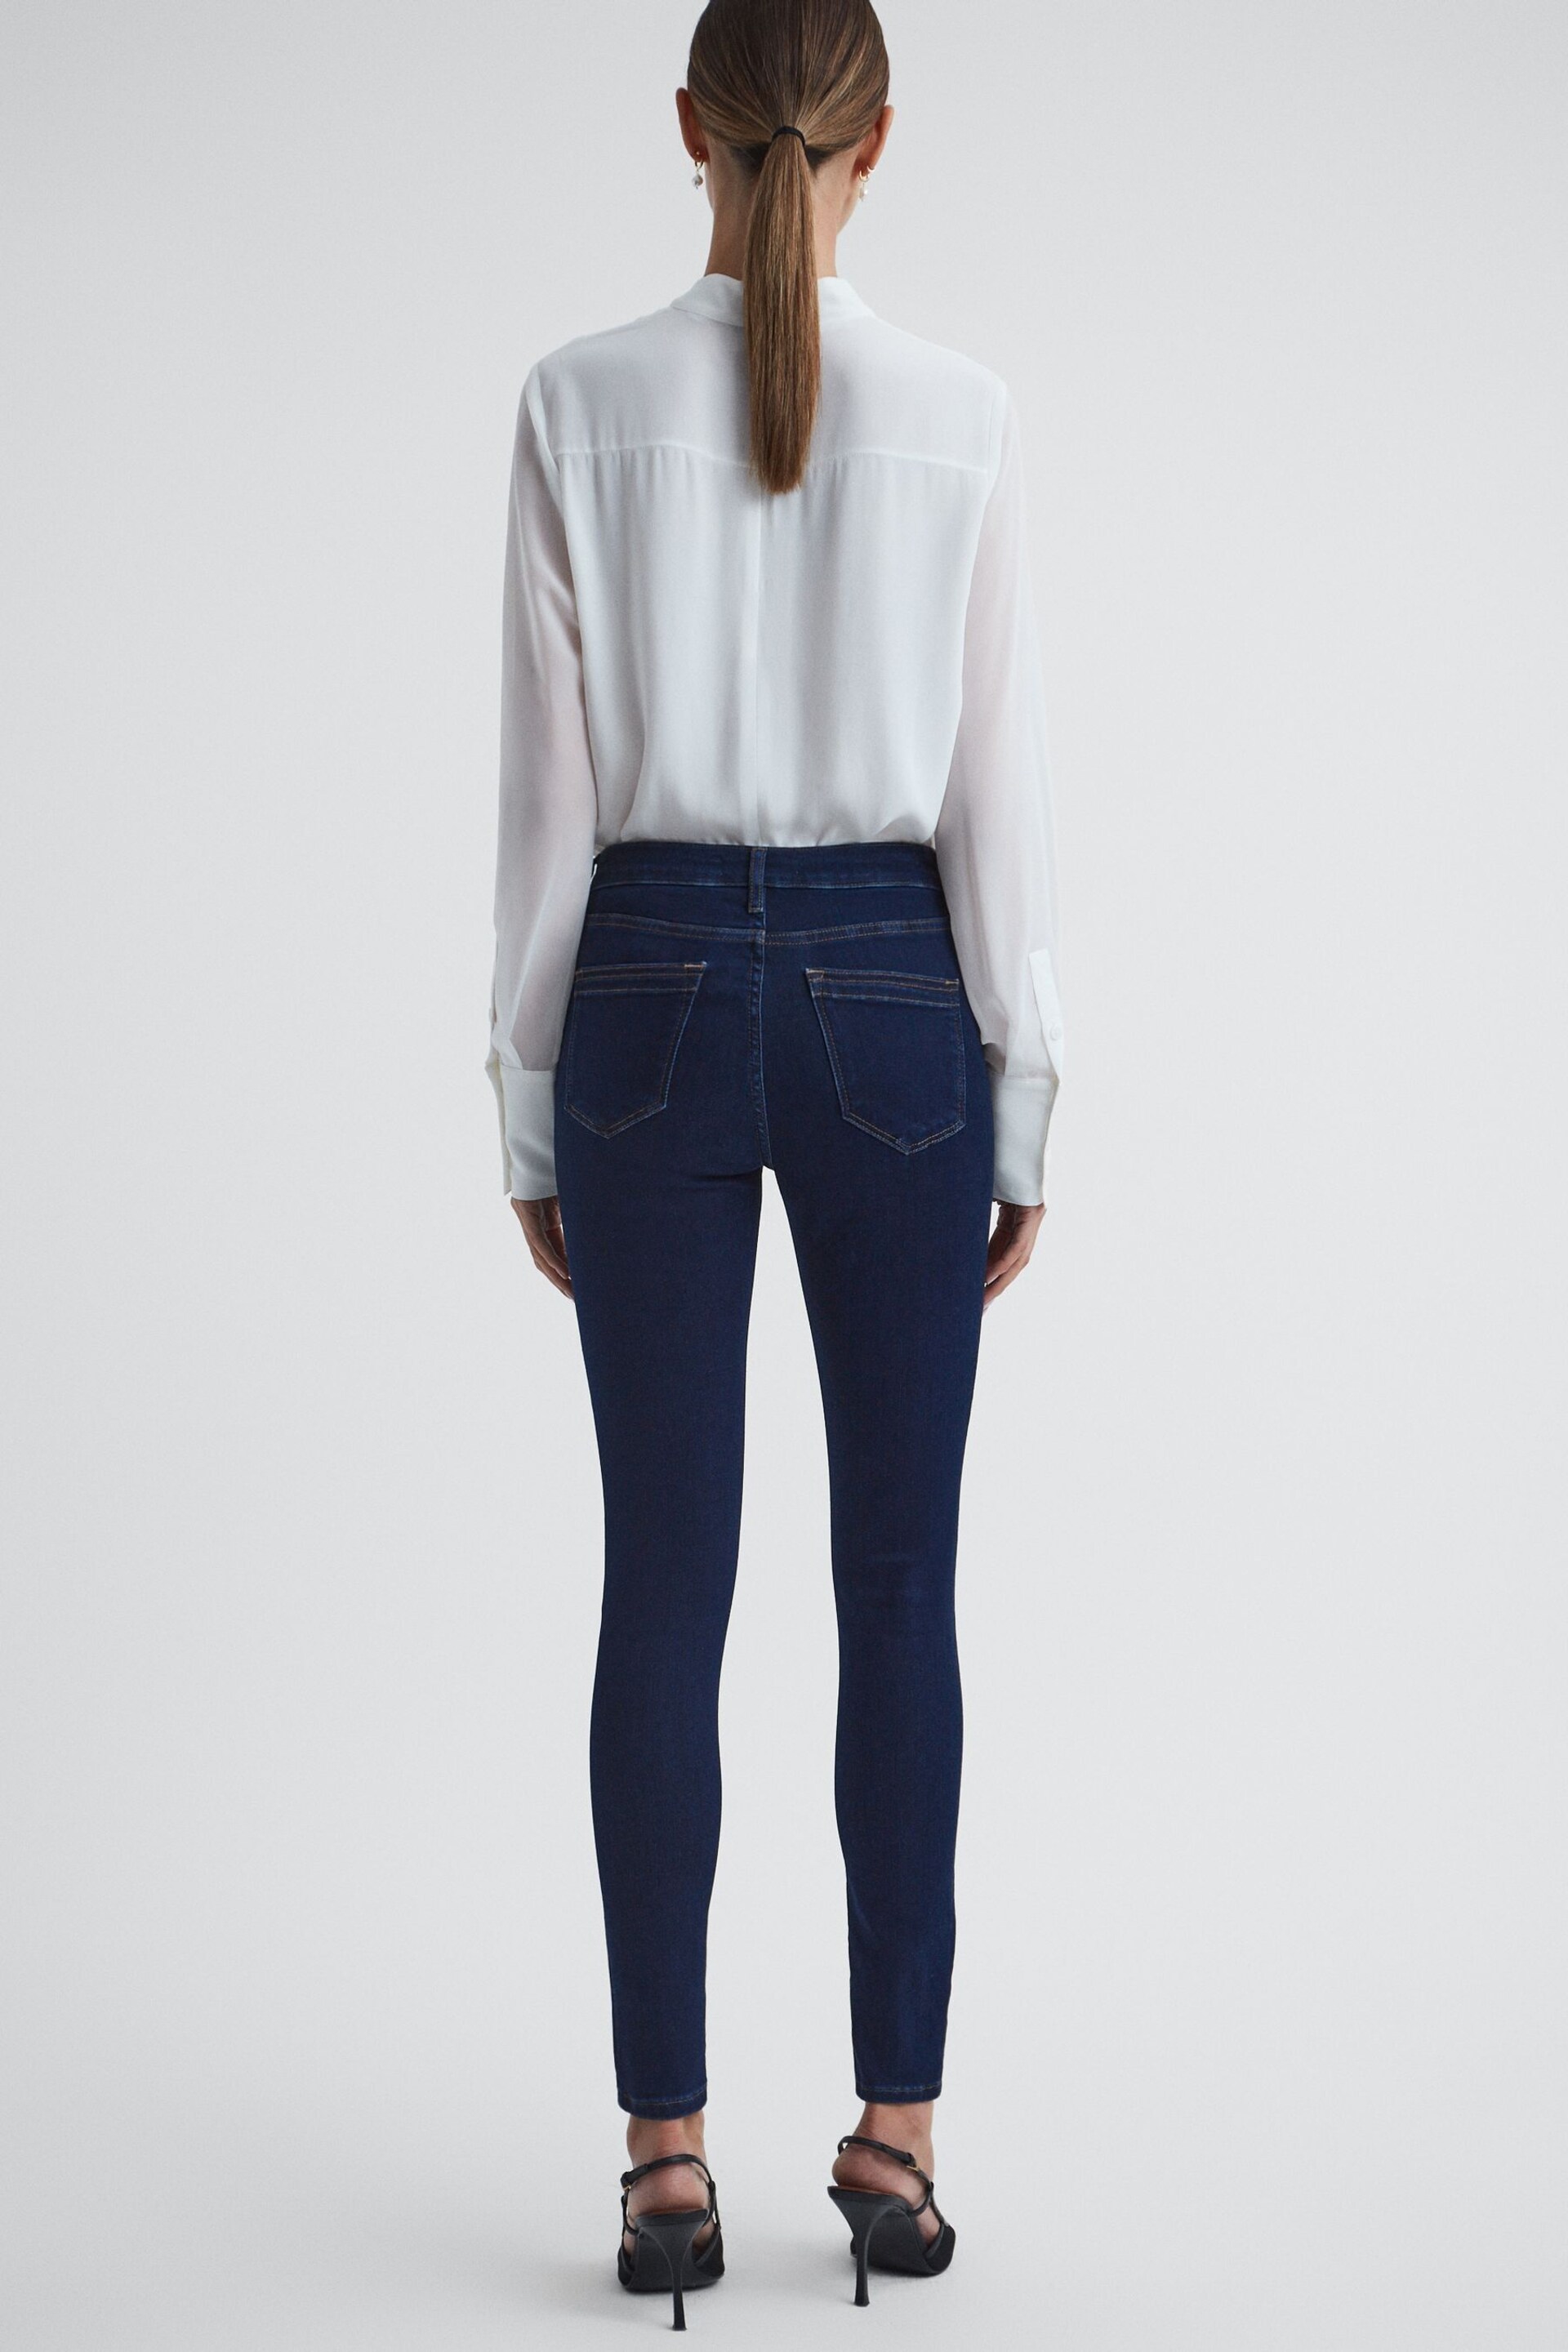 Reiss Indigo Lux Mid Rise Skinny Jeans - Image 5 of 5